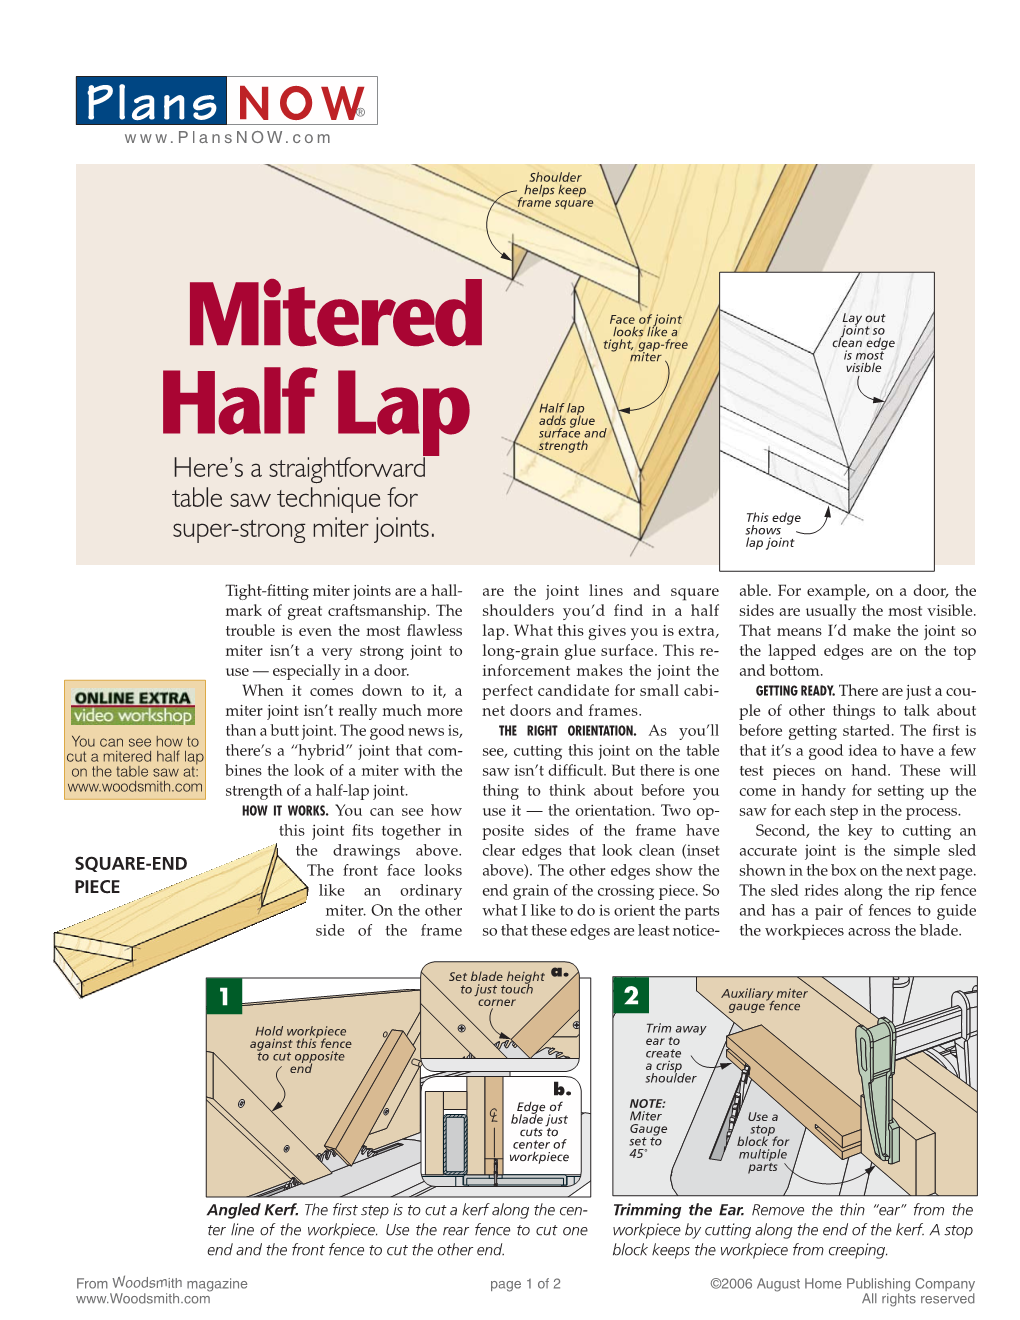 Mitered Half Lap Here’S a Straightforward Table Saw Technique for Super-Strong Miter Joints